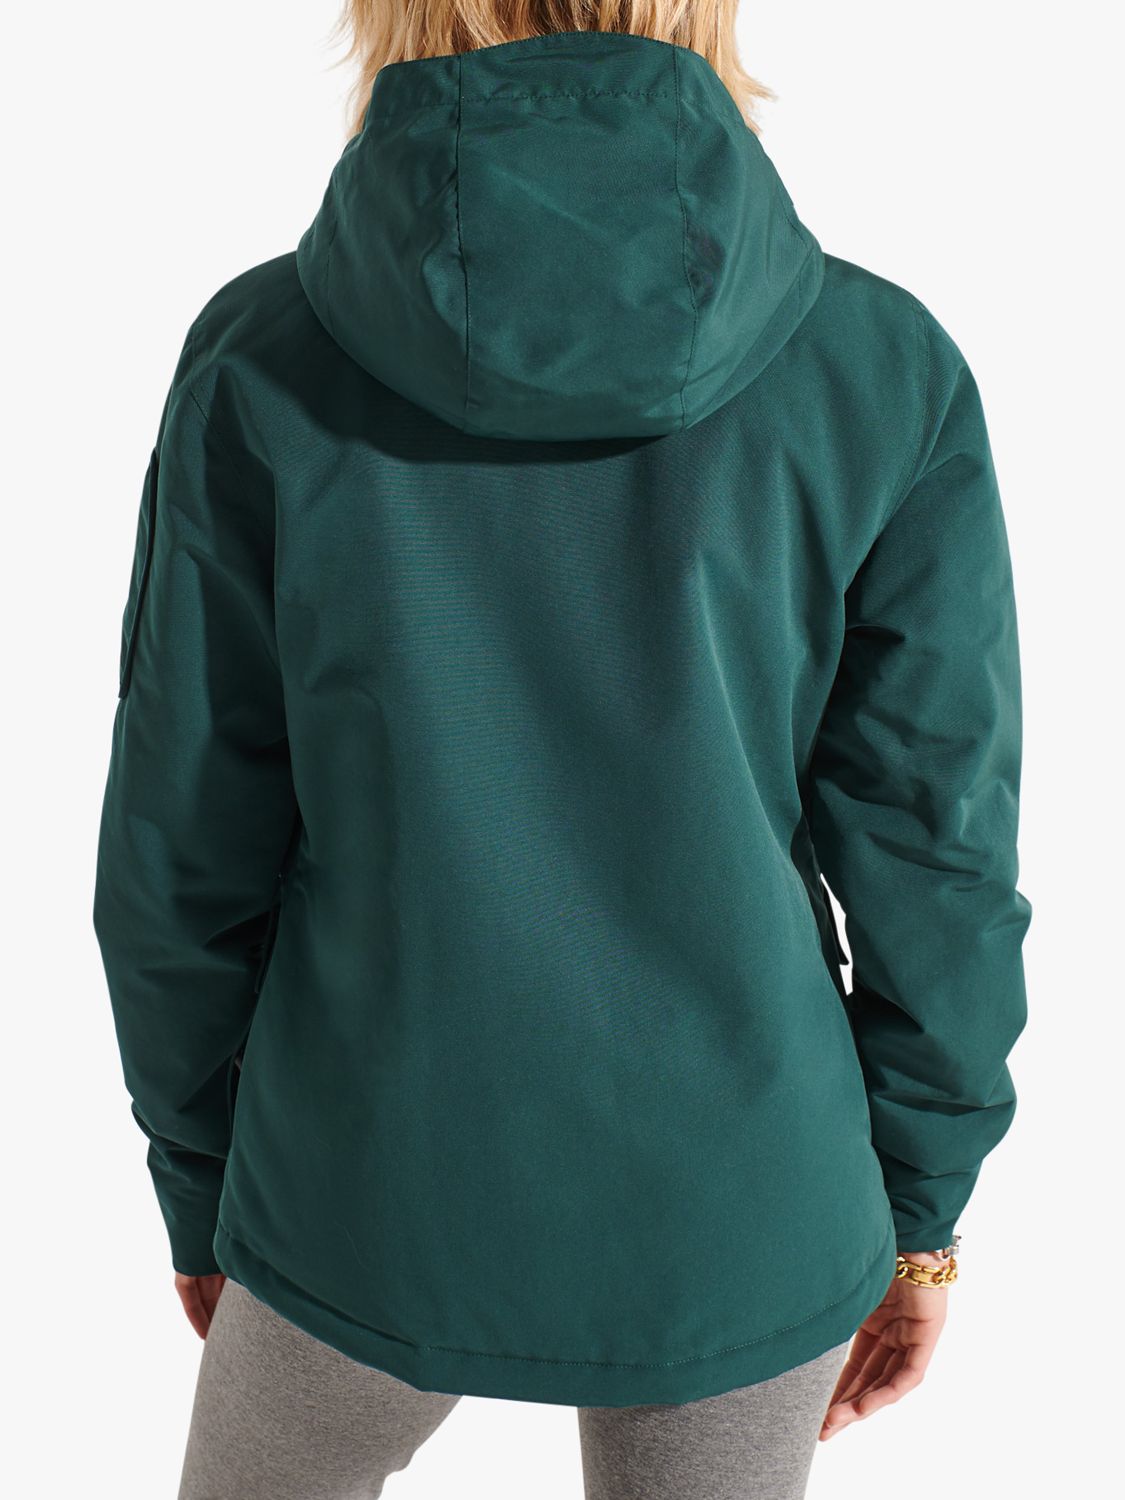 Ultimate Green & Partners Windcheater Superdry at SD John Lewis Jacket,